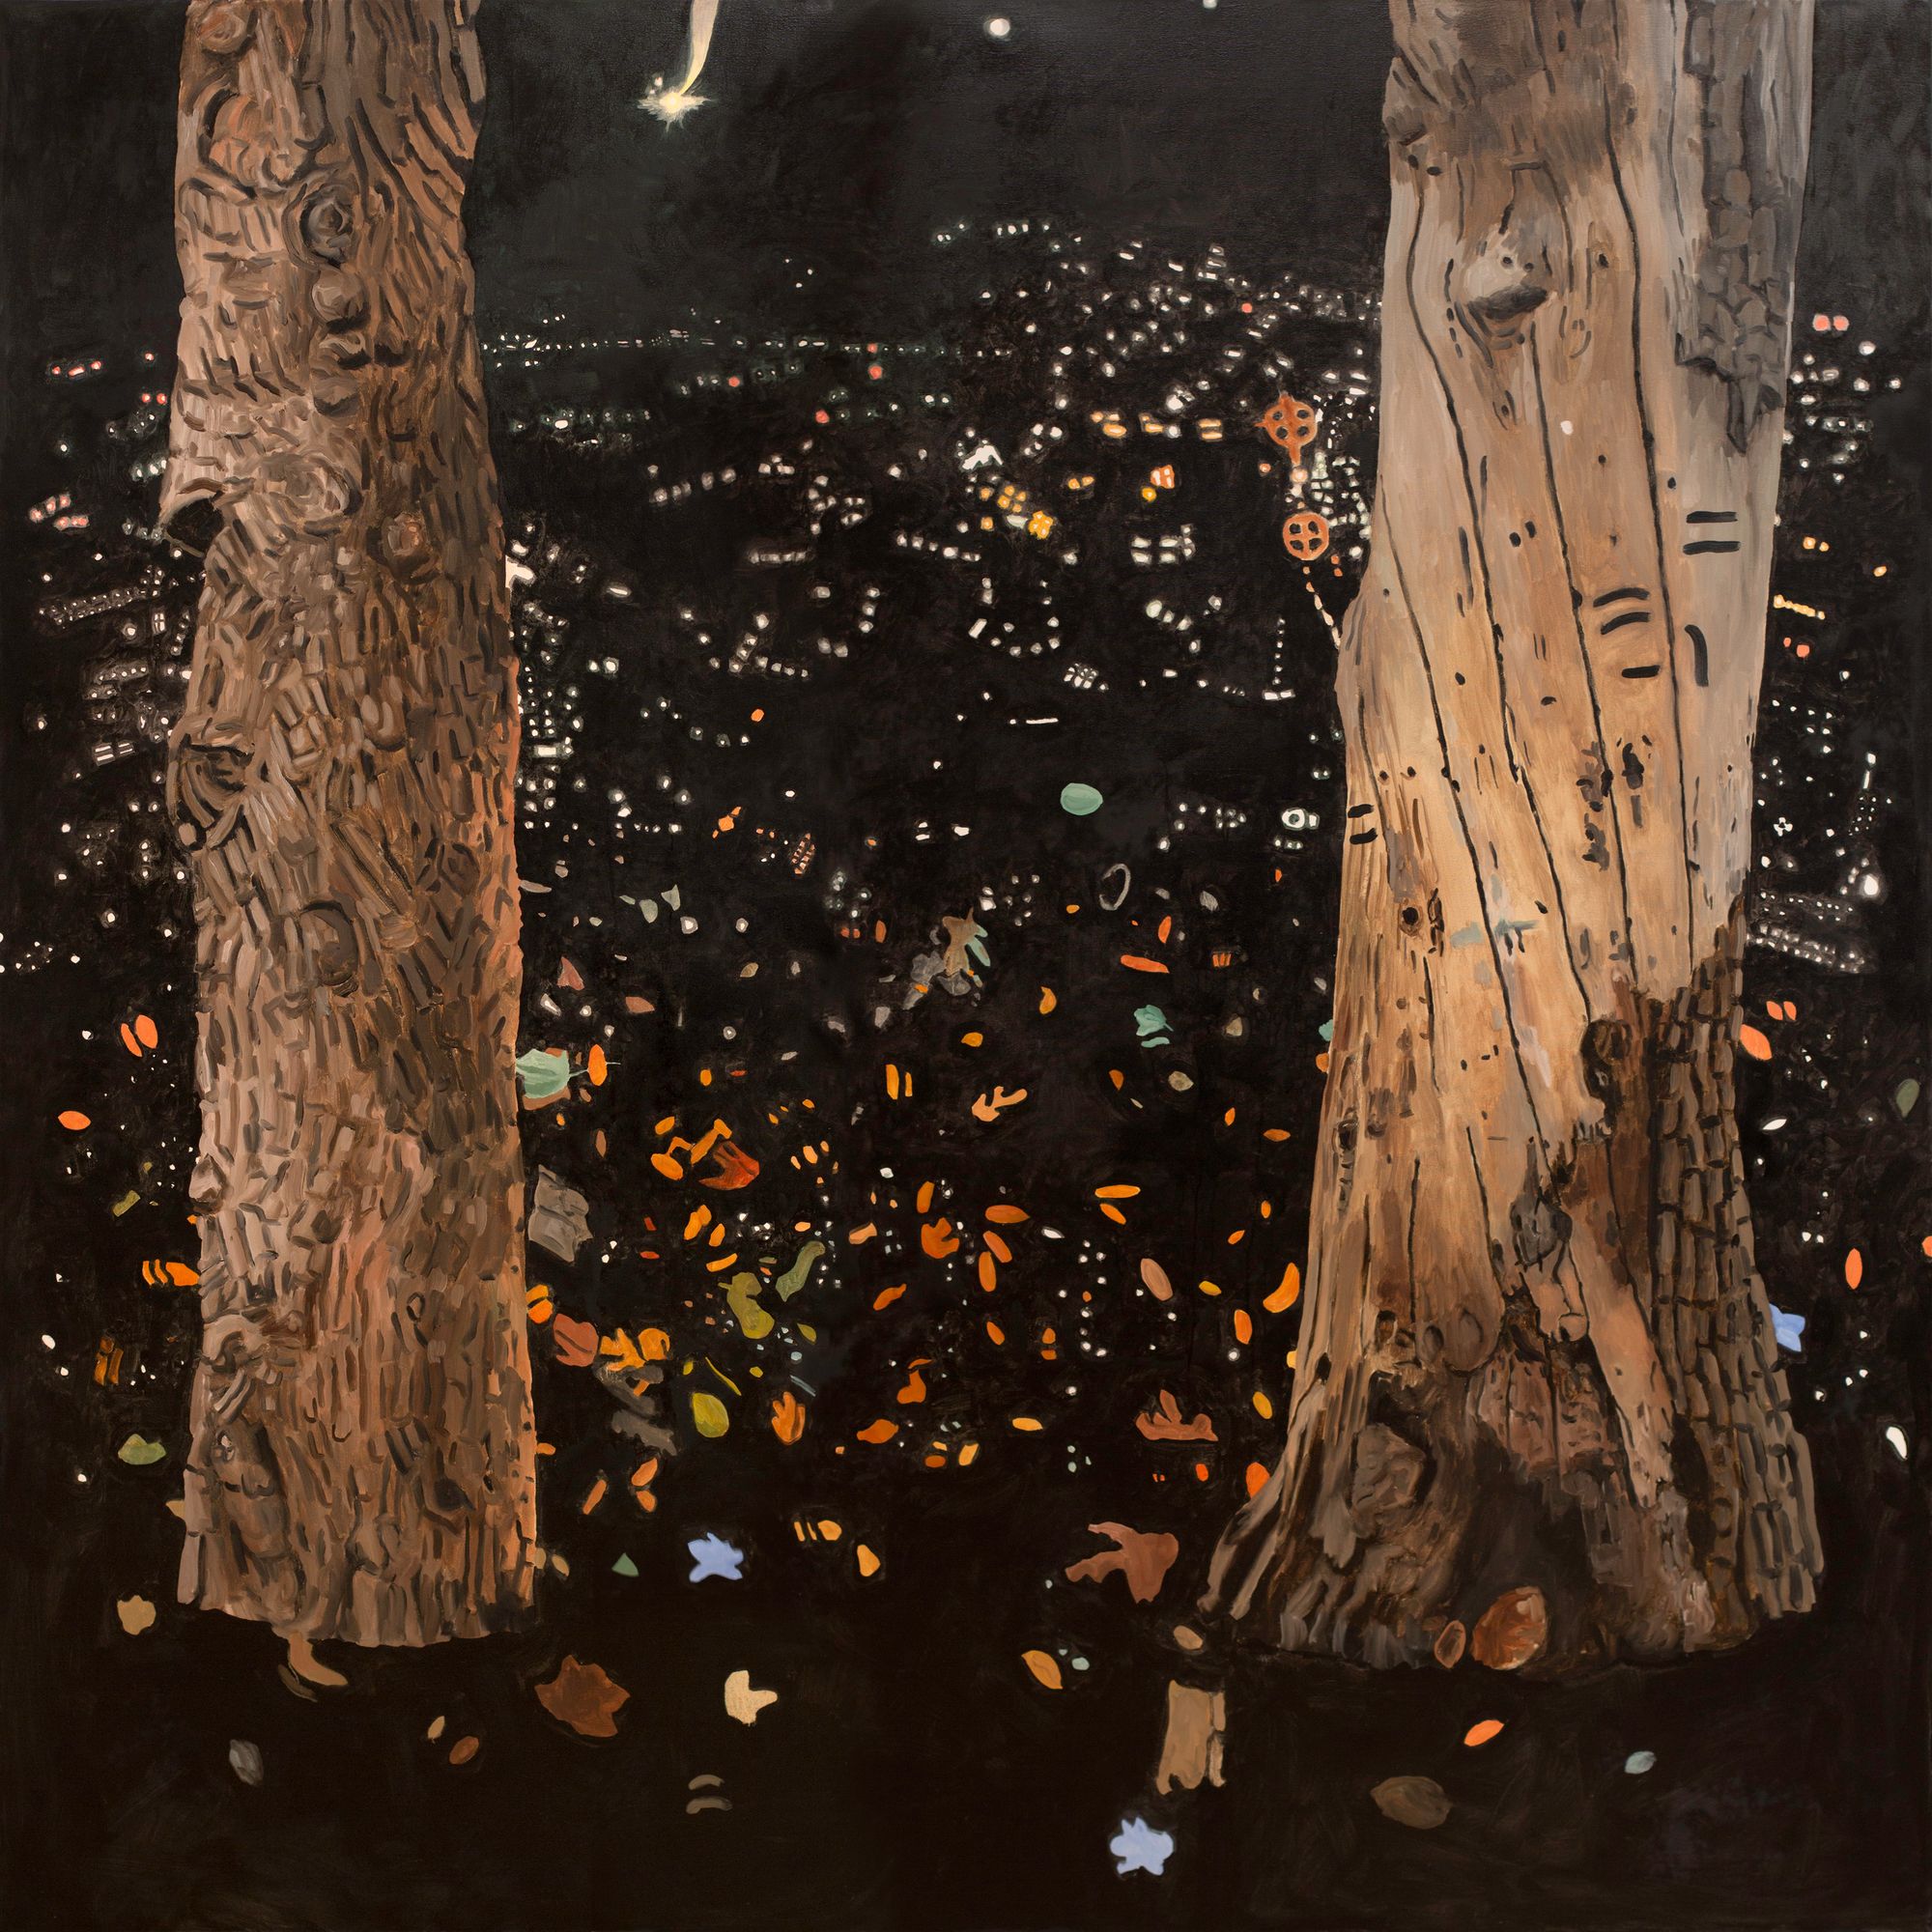 Two tree trunks rest on a dark ground covered in leaves, flowers, symbols, and what appears to be the lights of a city at night.